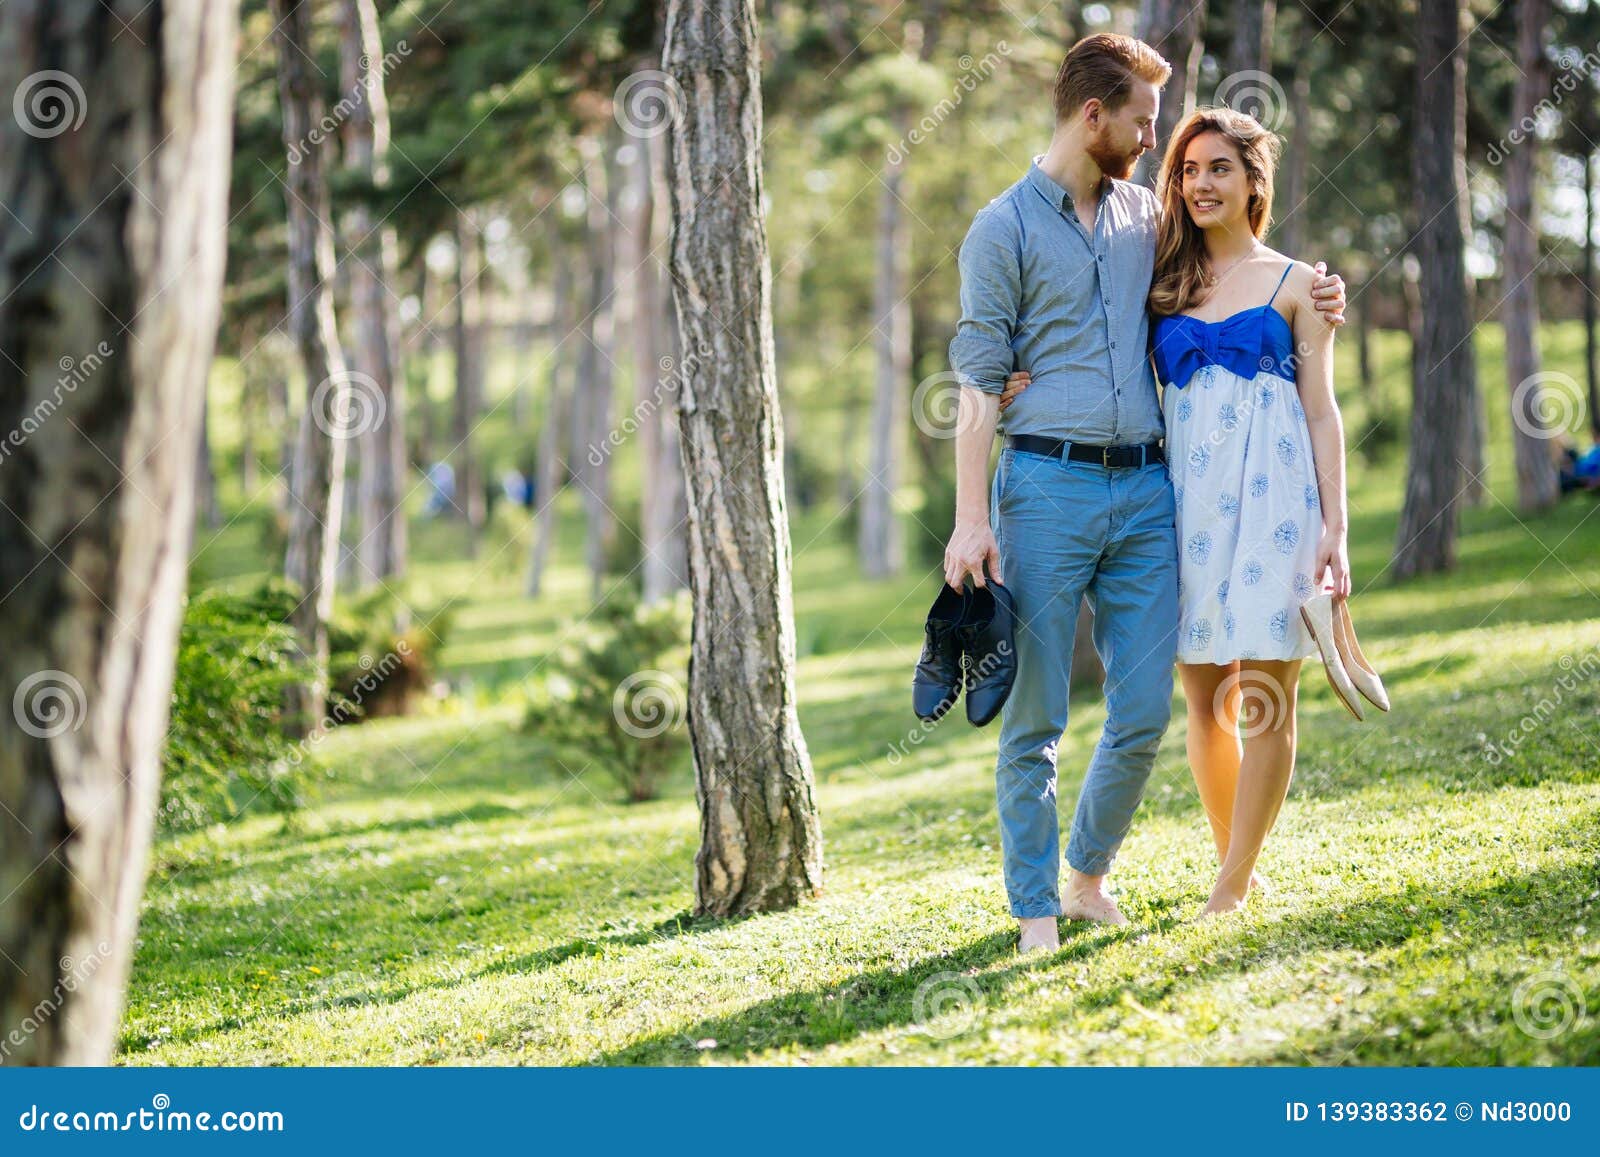 Beautiful Couple in Forest Embracing Love Stock Photo - Image of happy